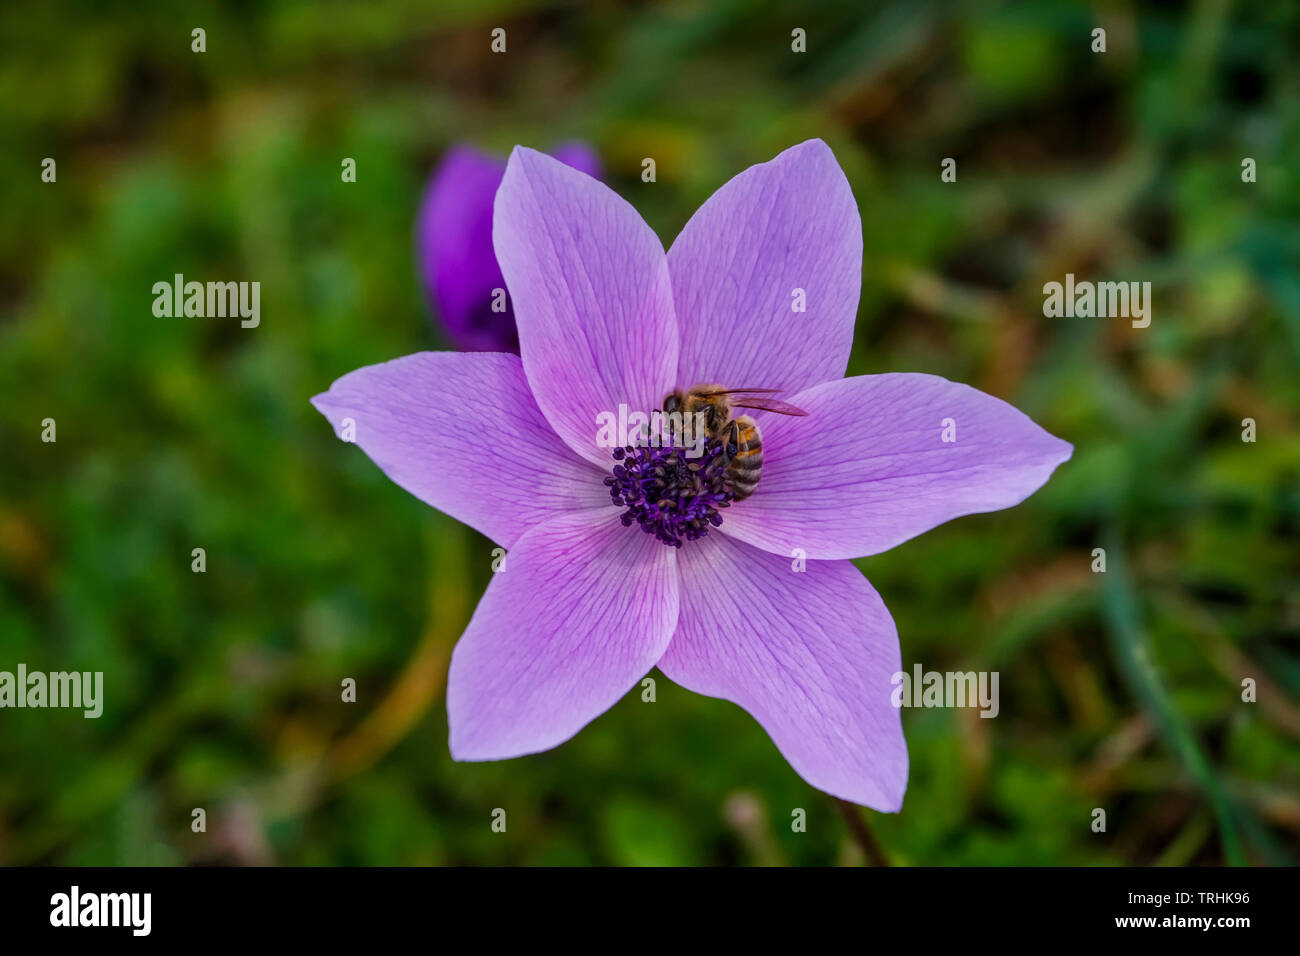 The appearance of a Lila-colored anemone flower from above Stock Photo